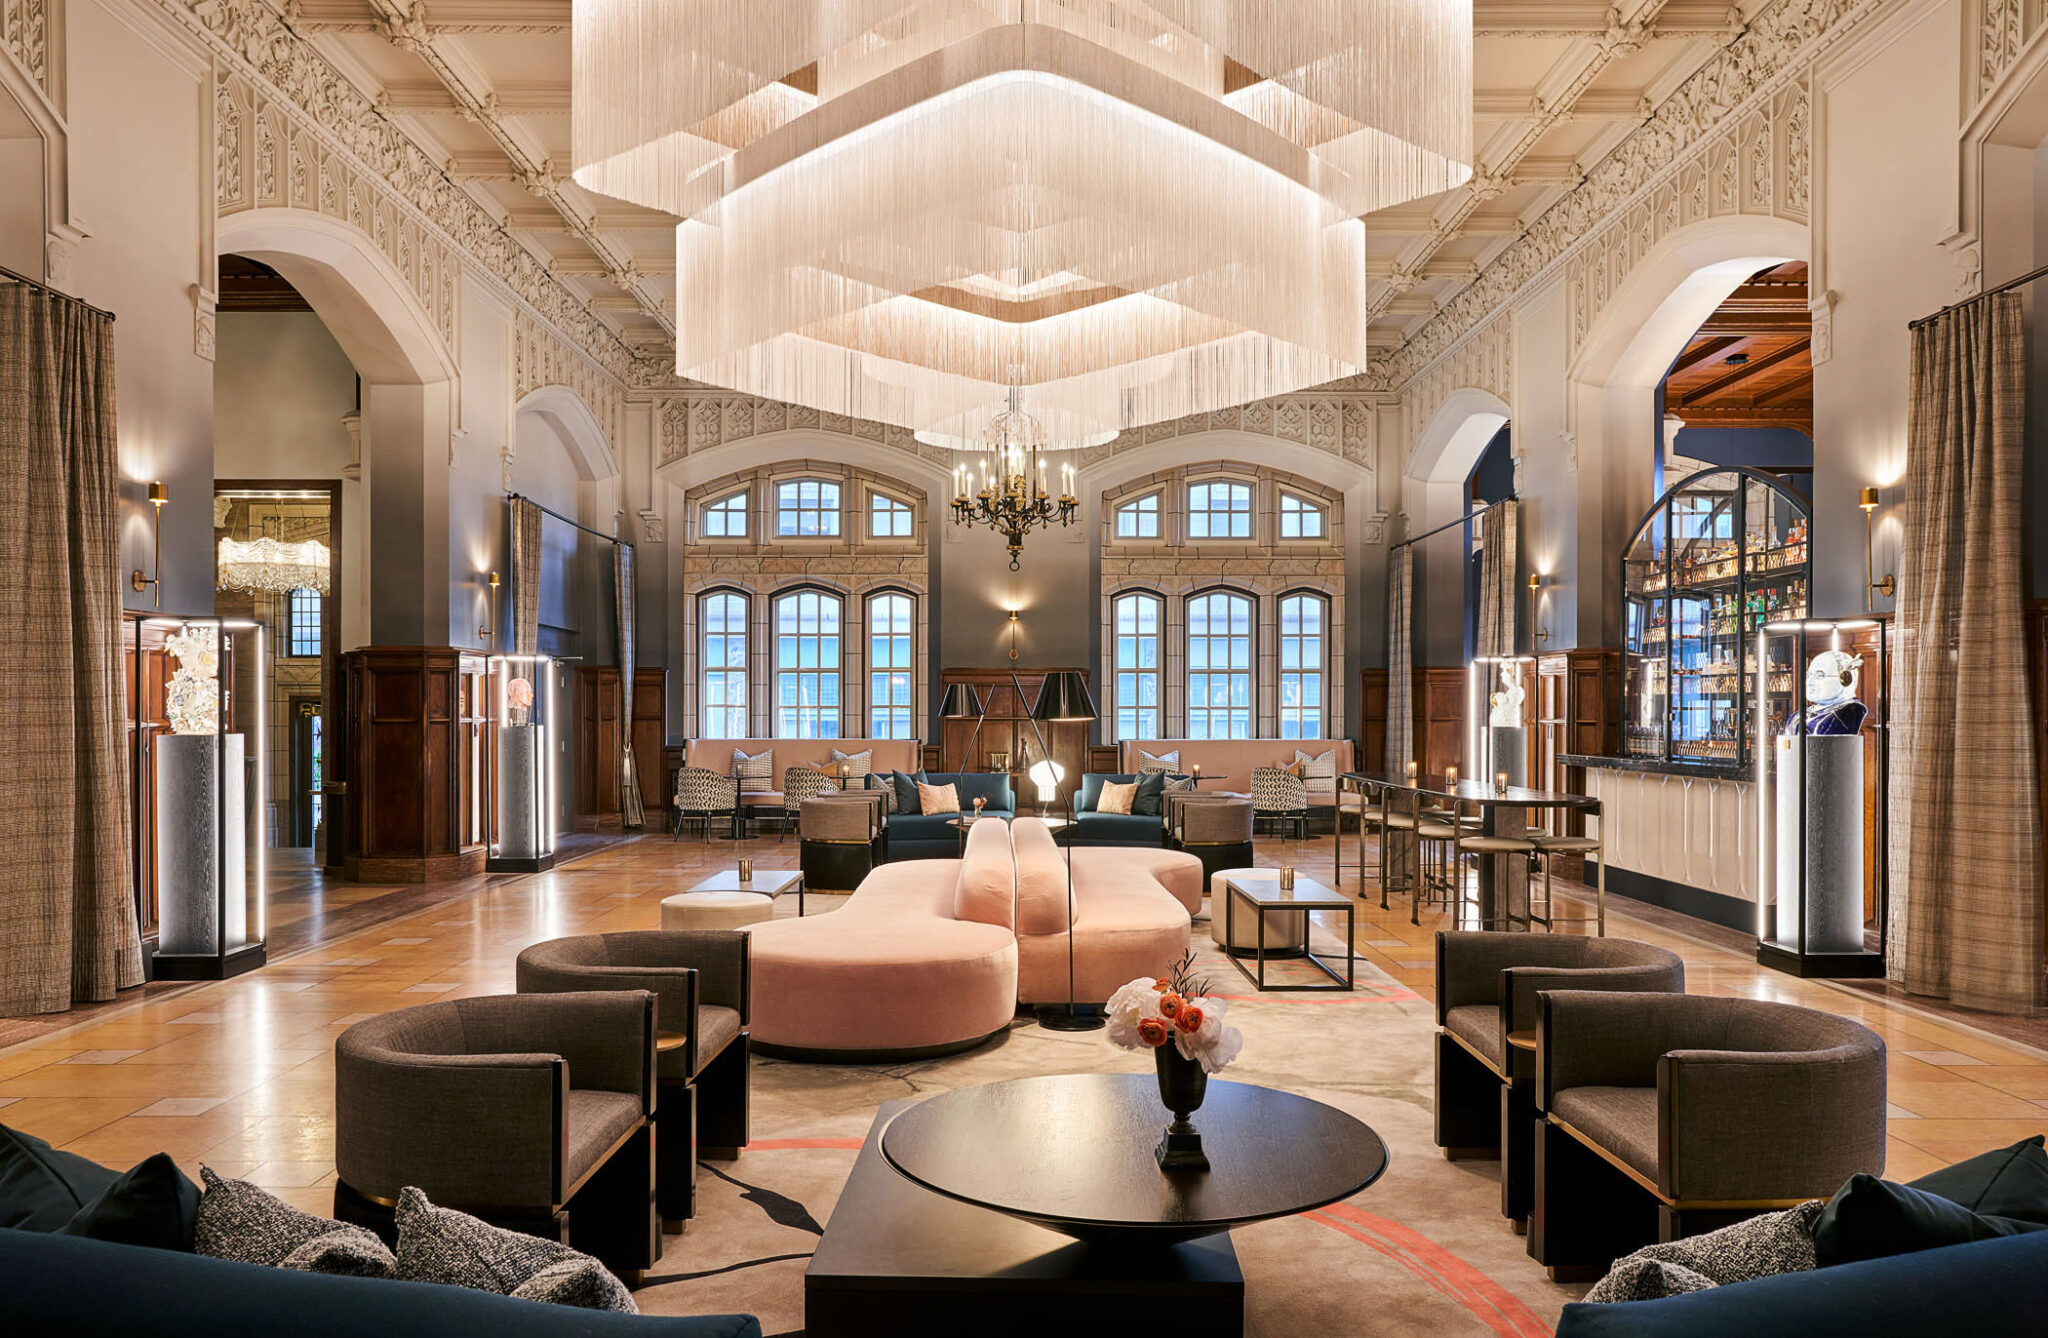 This Boutique Hotel in the Midwest’s Most Prominent City Was Once an Elite Social Club